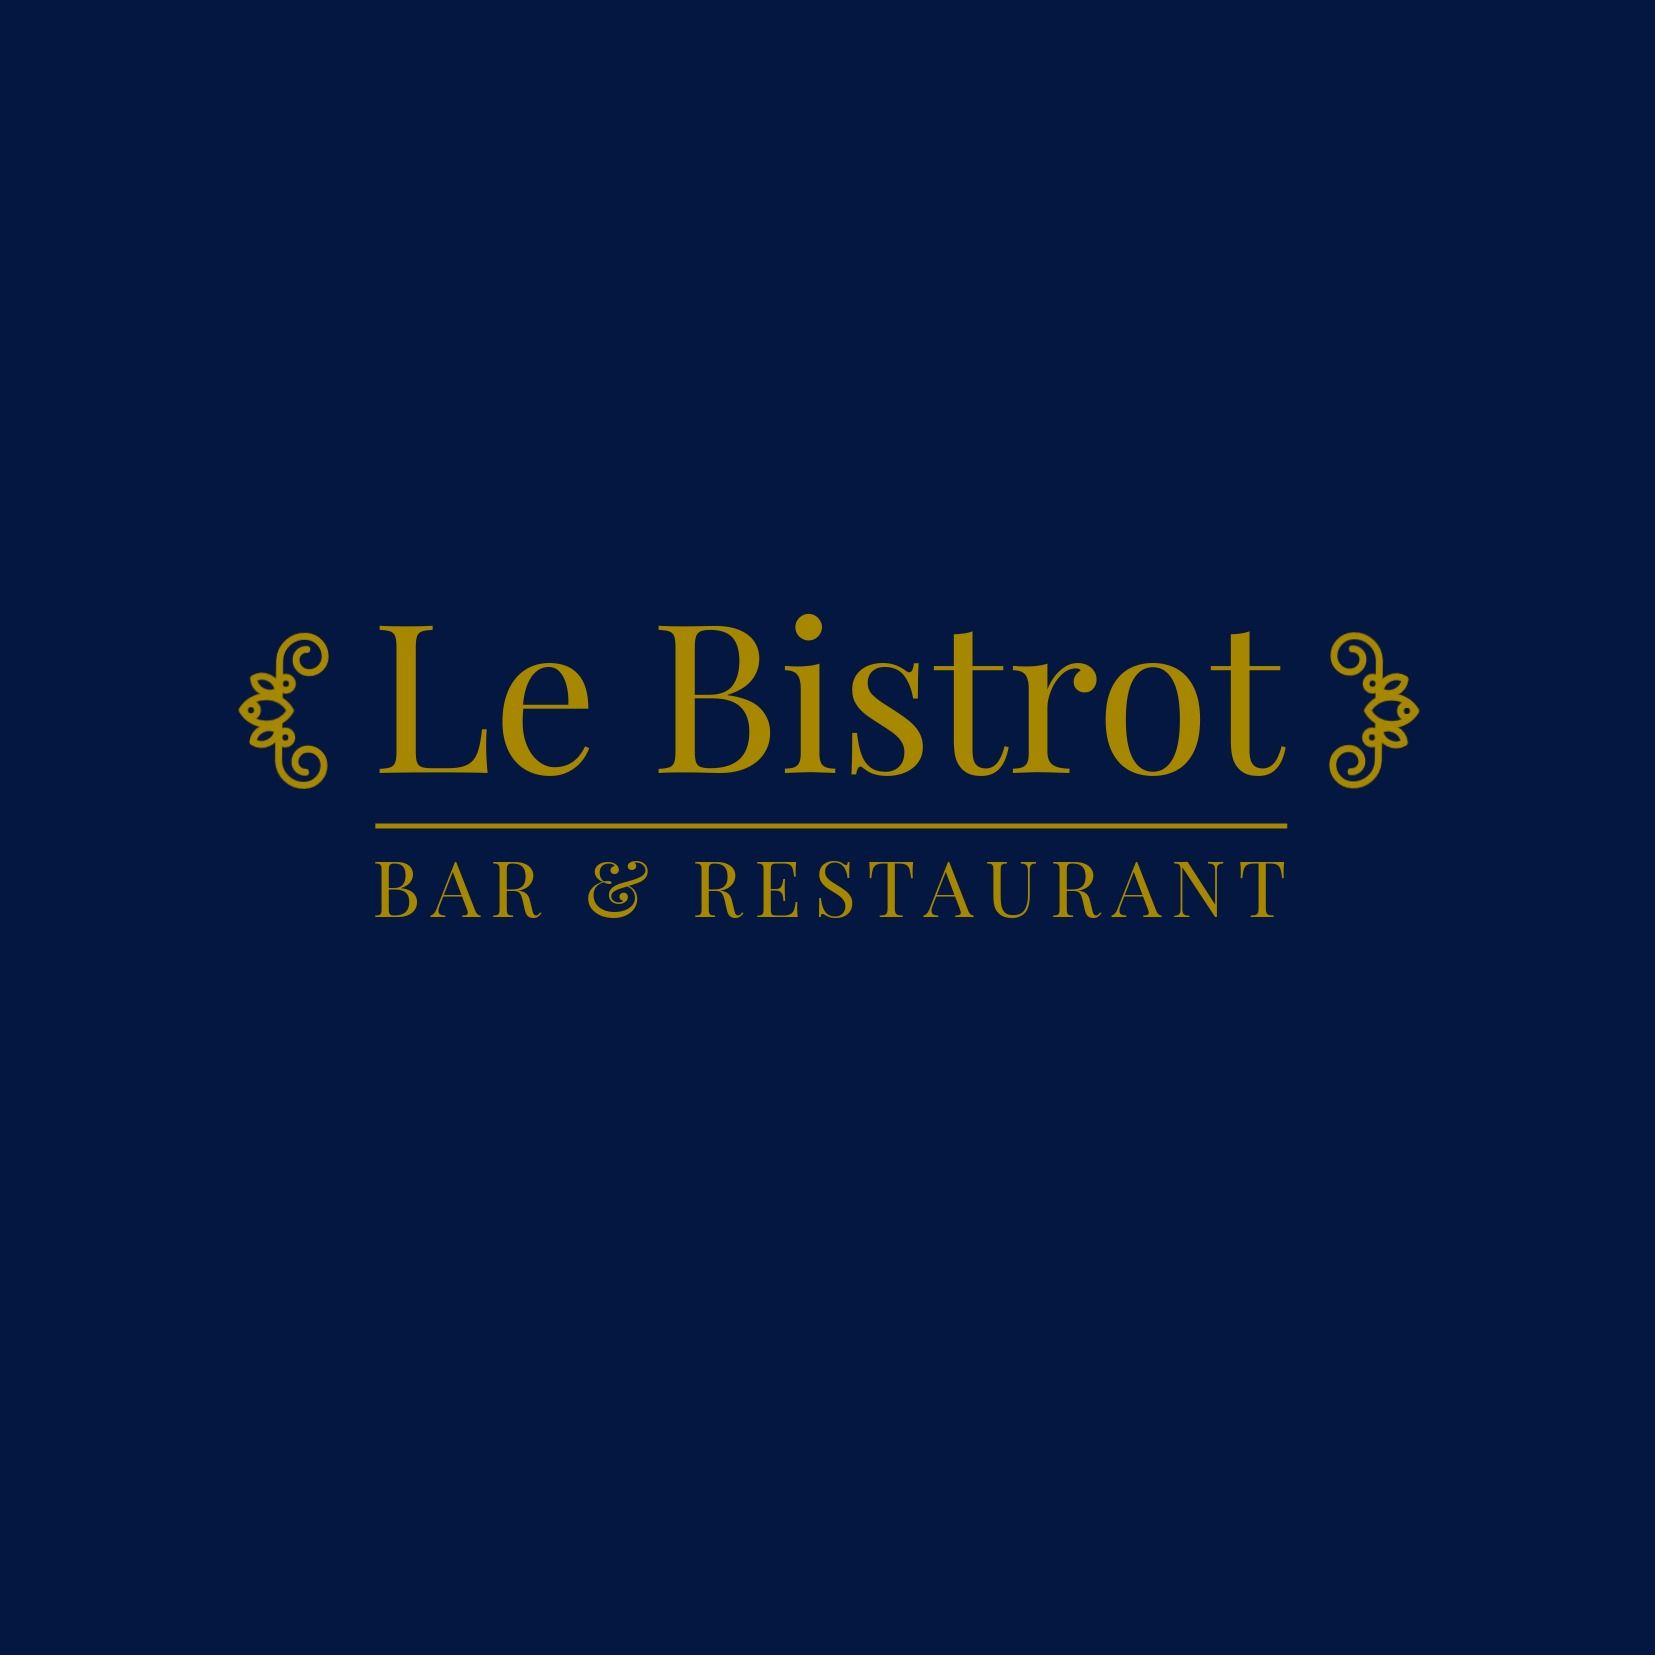 Text on a blue background in Playfair Display font - Playfair Display in restaurant logo design - Image